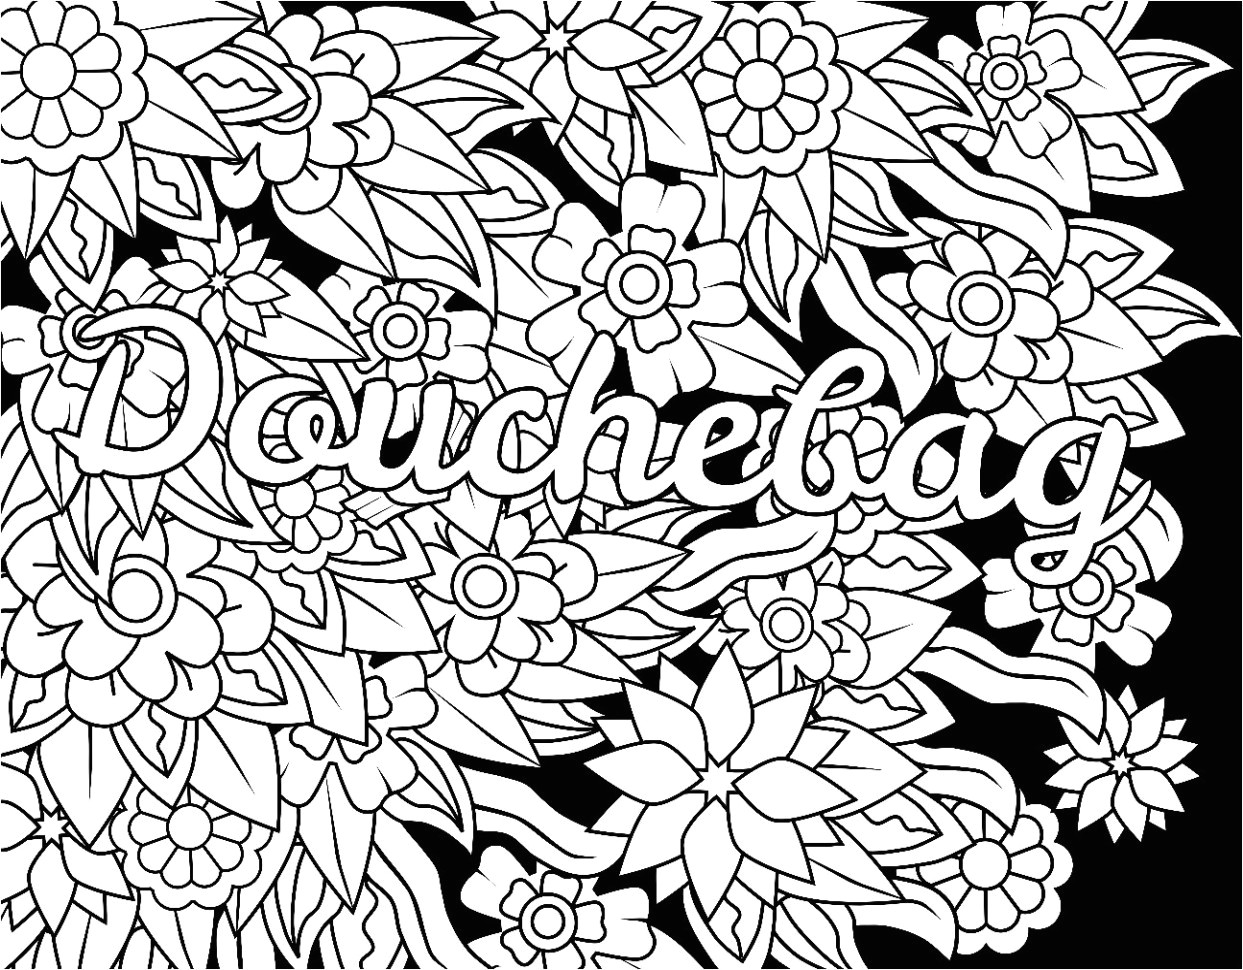 Drawing Flowers In Color Flower Color Pages Cool Vases Flower Vase Coloring Page Pages